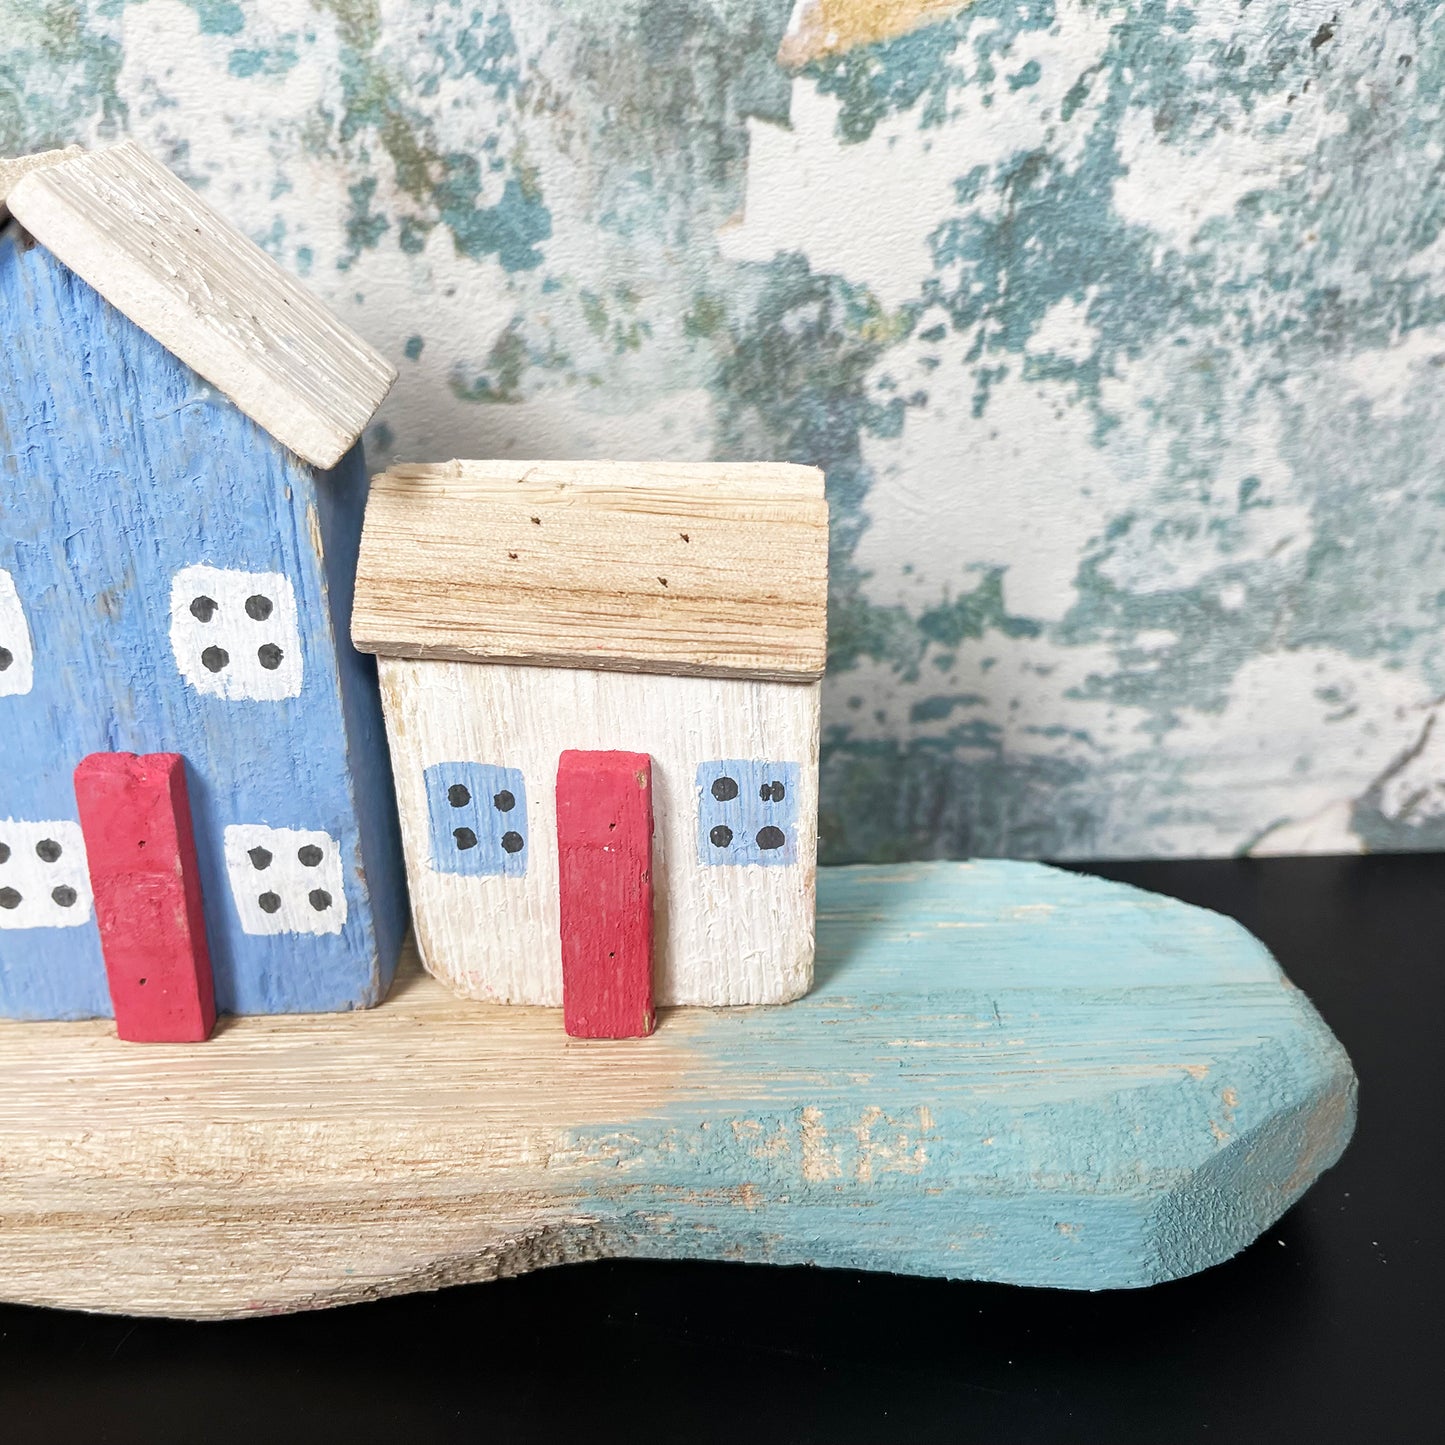 Rustic Wooden Harbour Houses Ornament